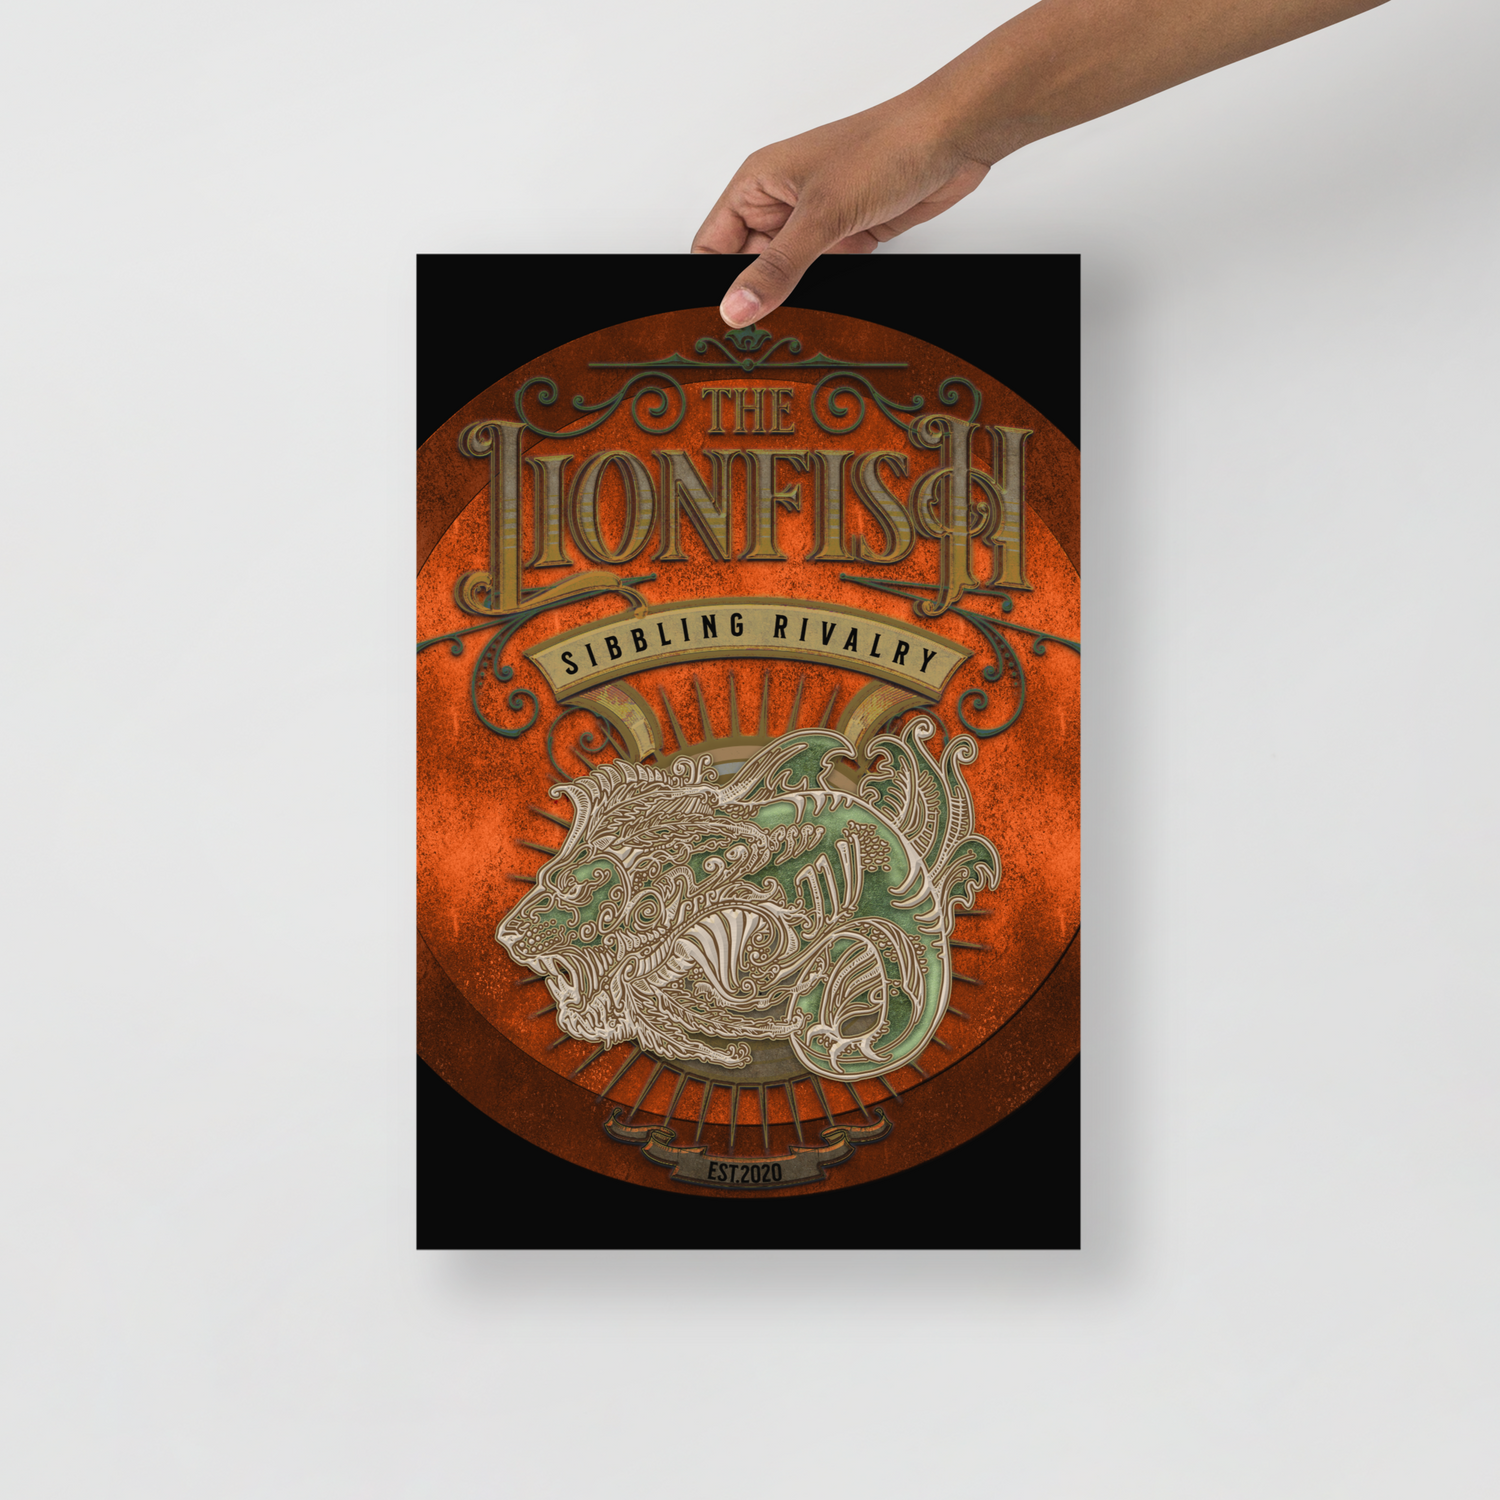 LIONFISH PUB-STYLE POSTER ~ Quality Photo-paper poster - SIB.BLING RIVALRY